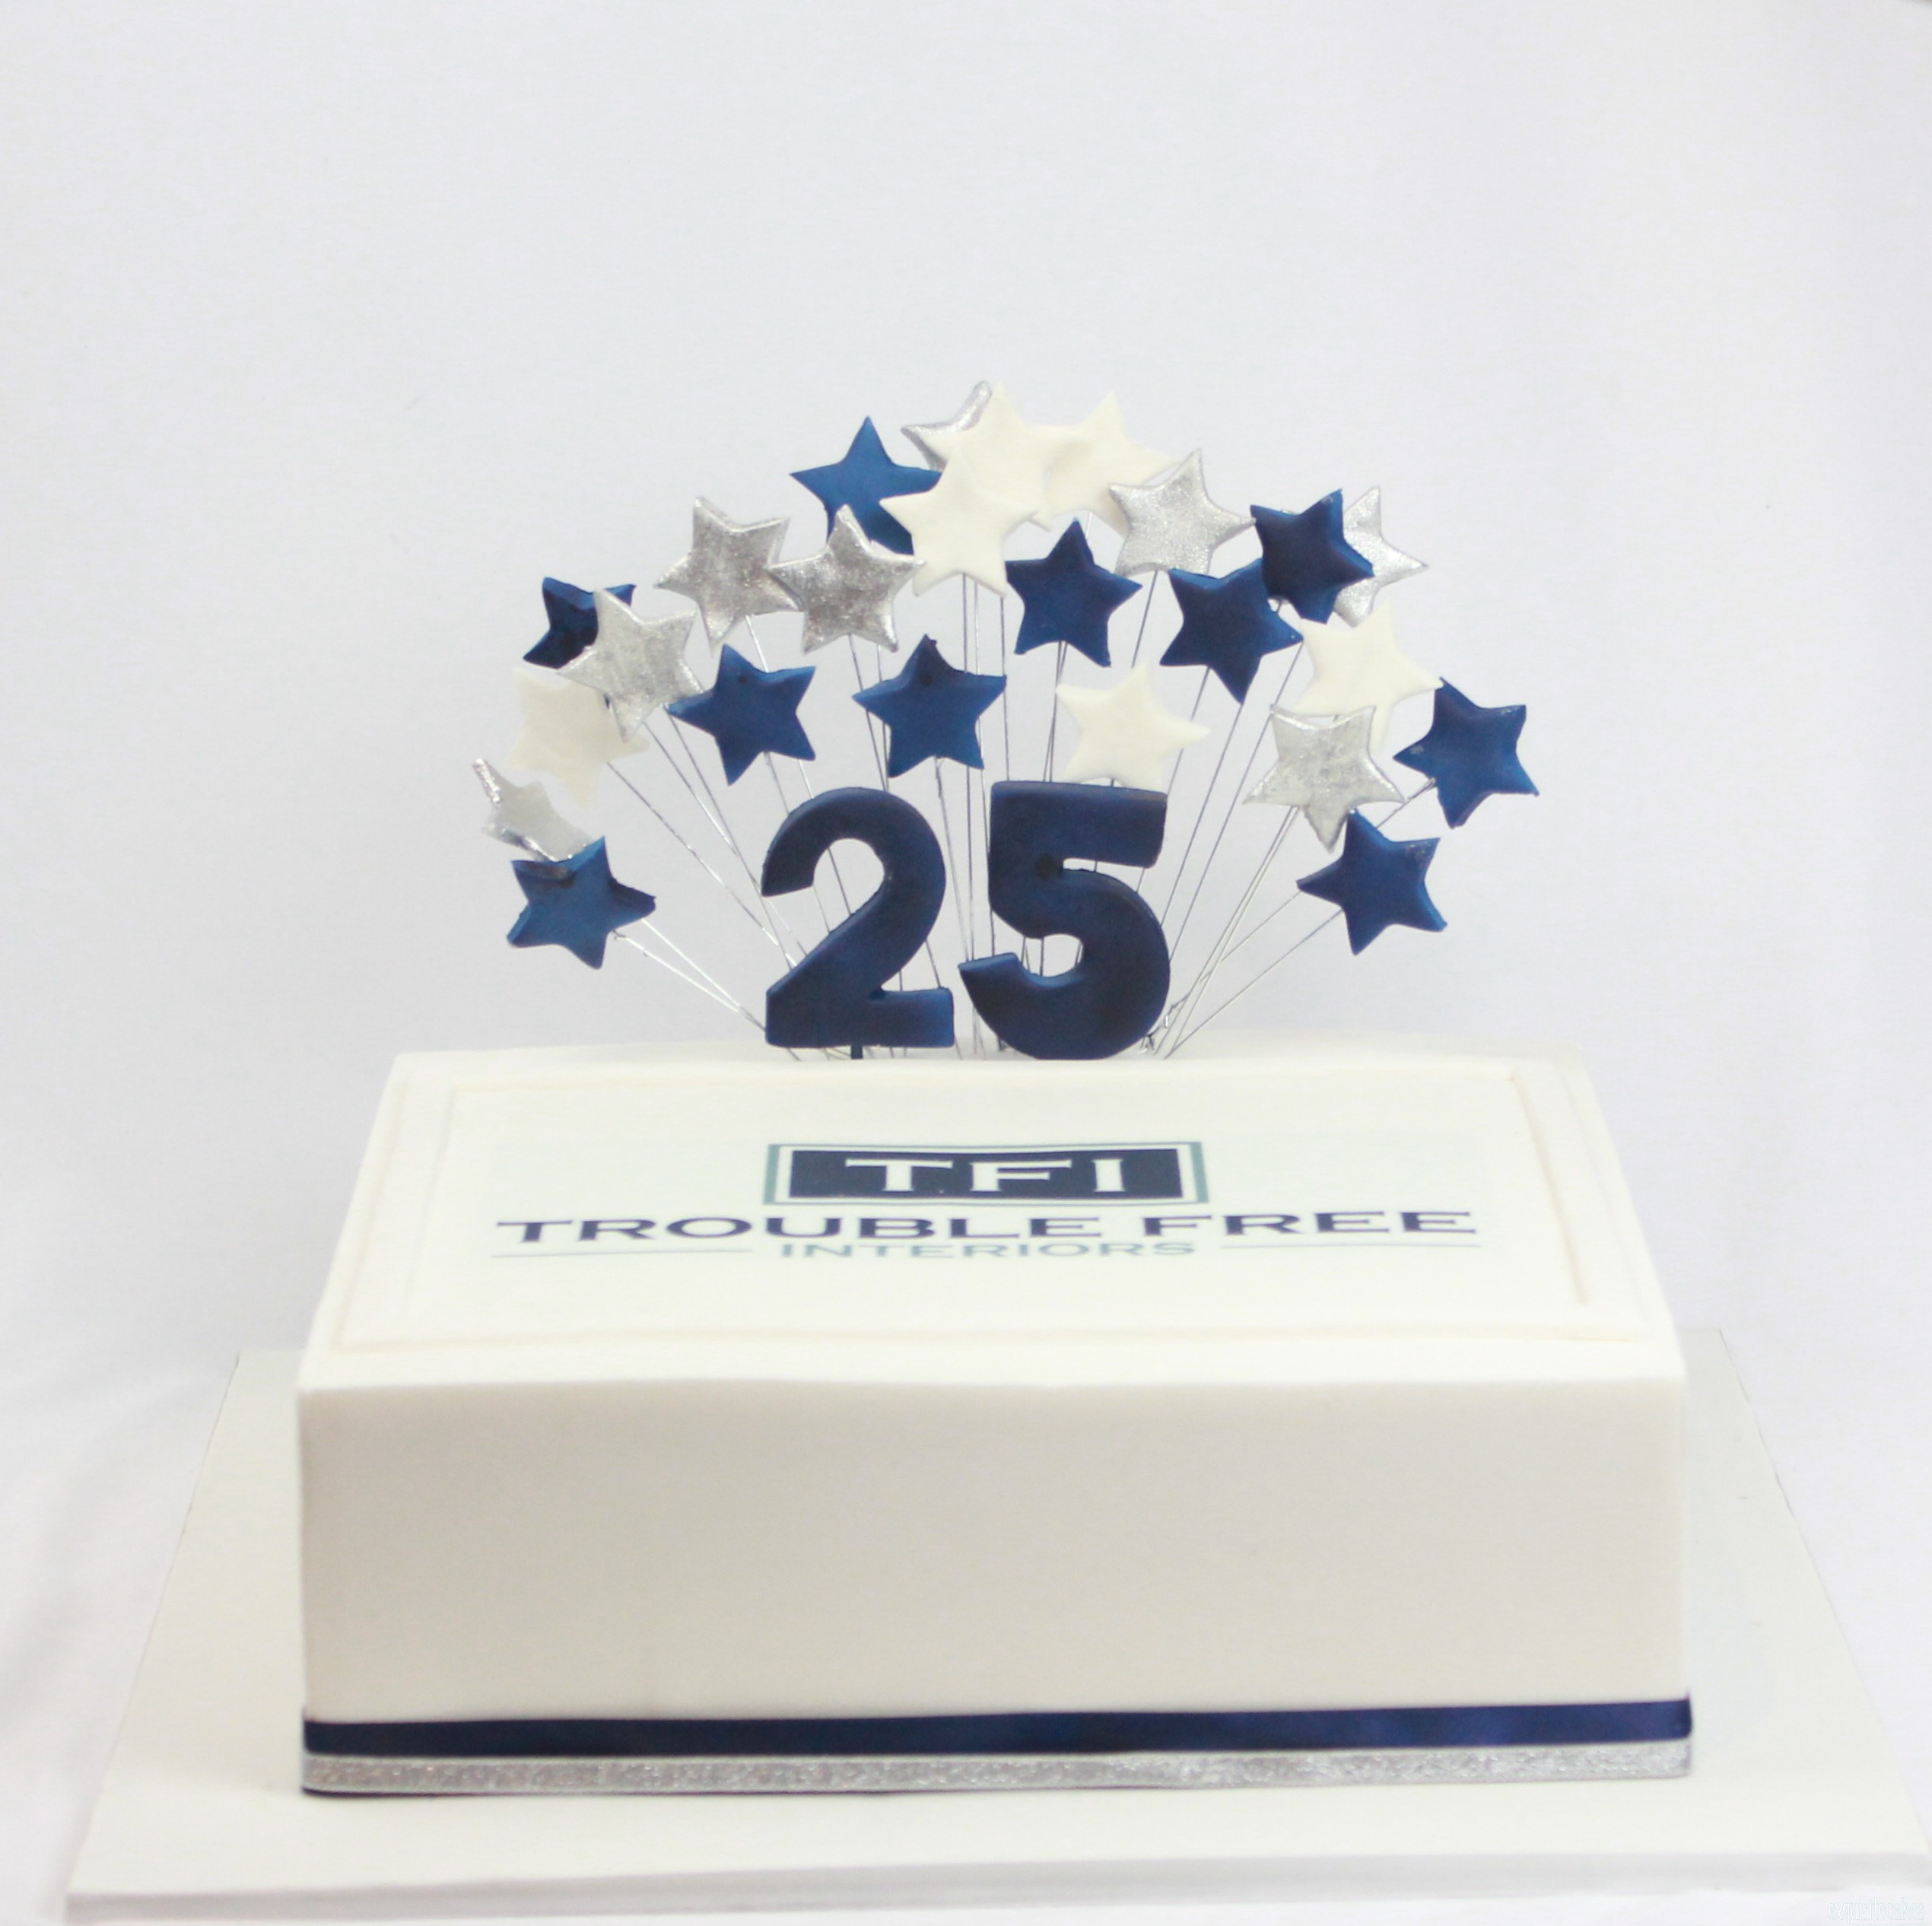 Corporate cakes with corporate logo. special event cakes